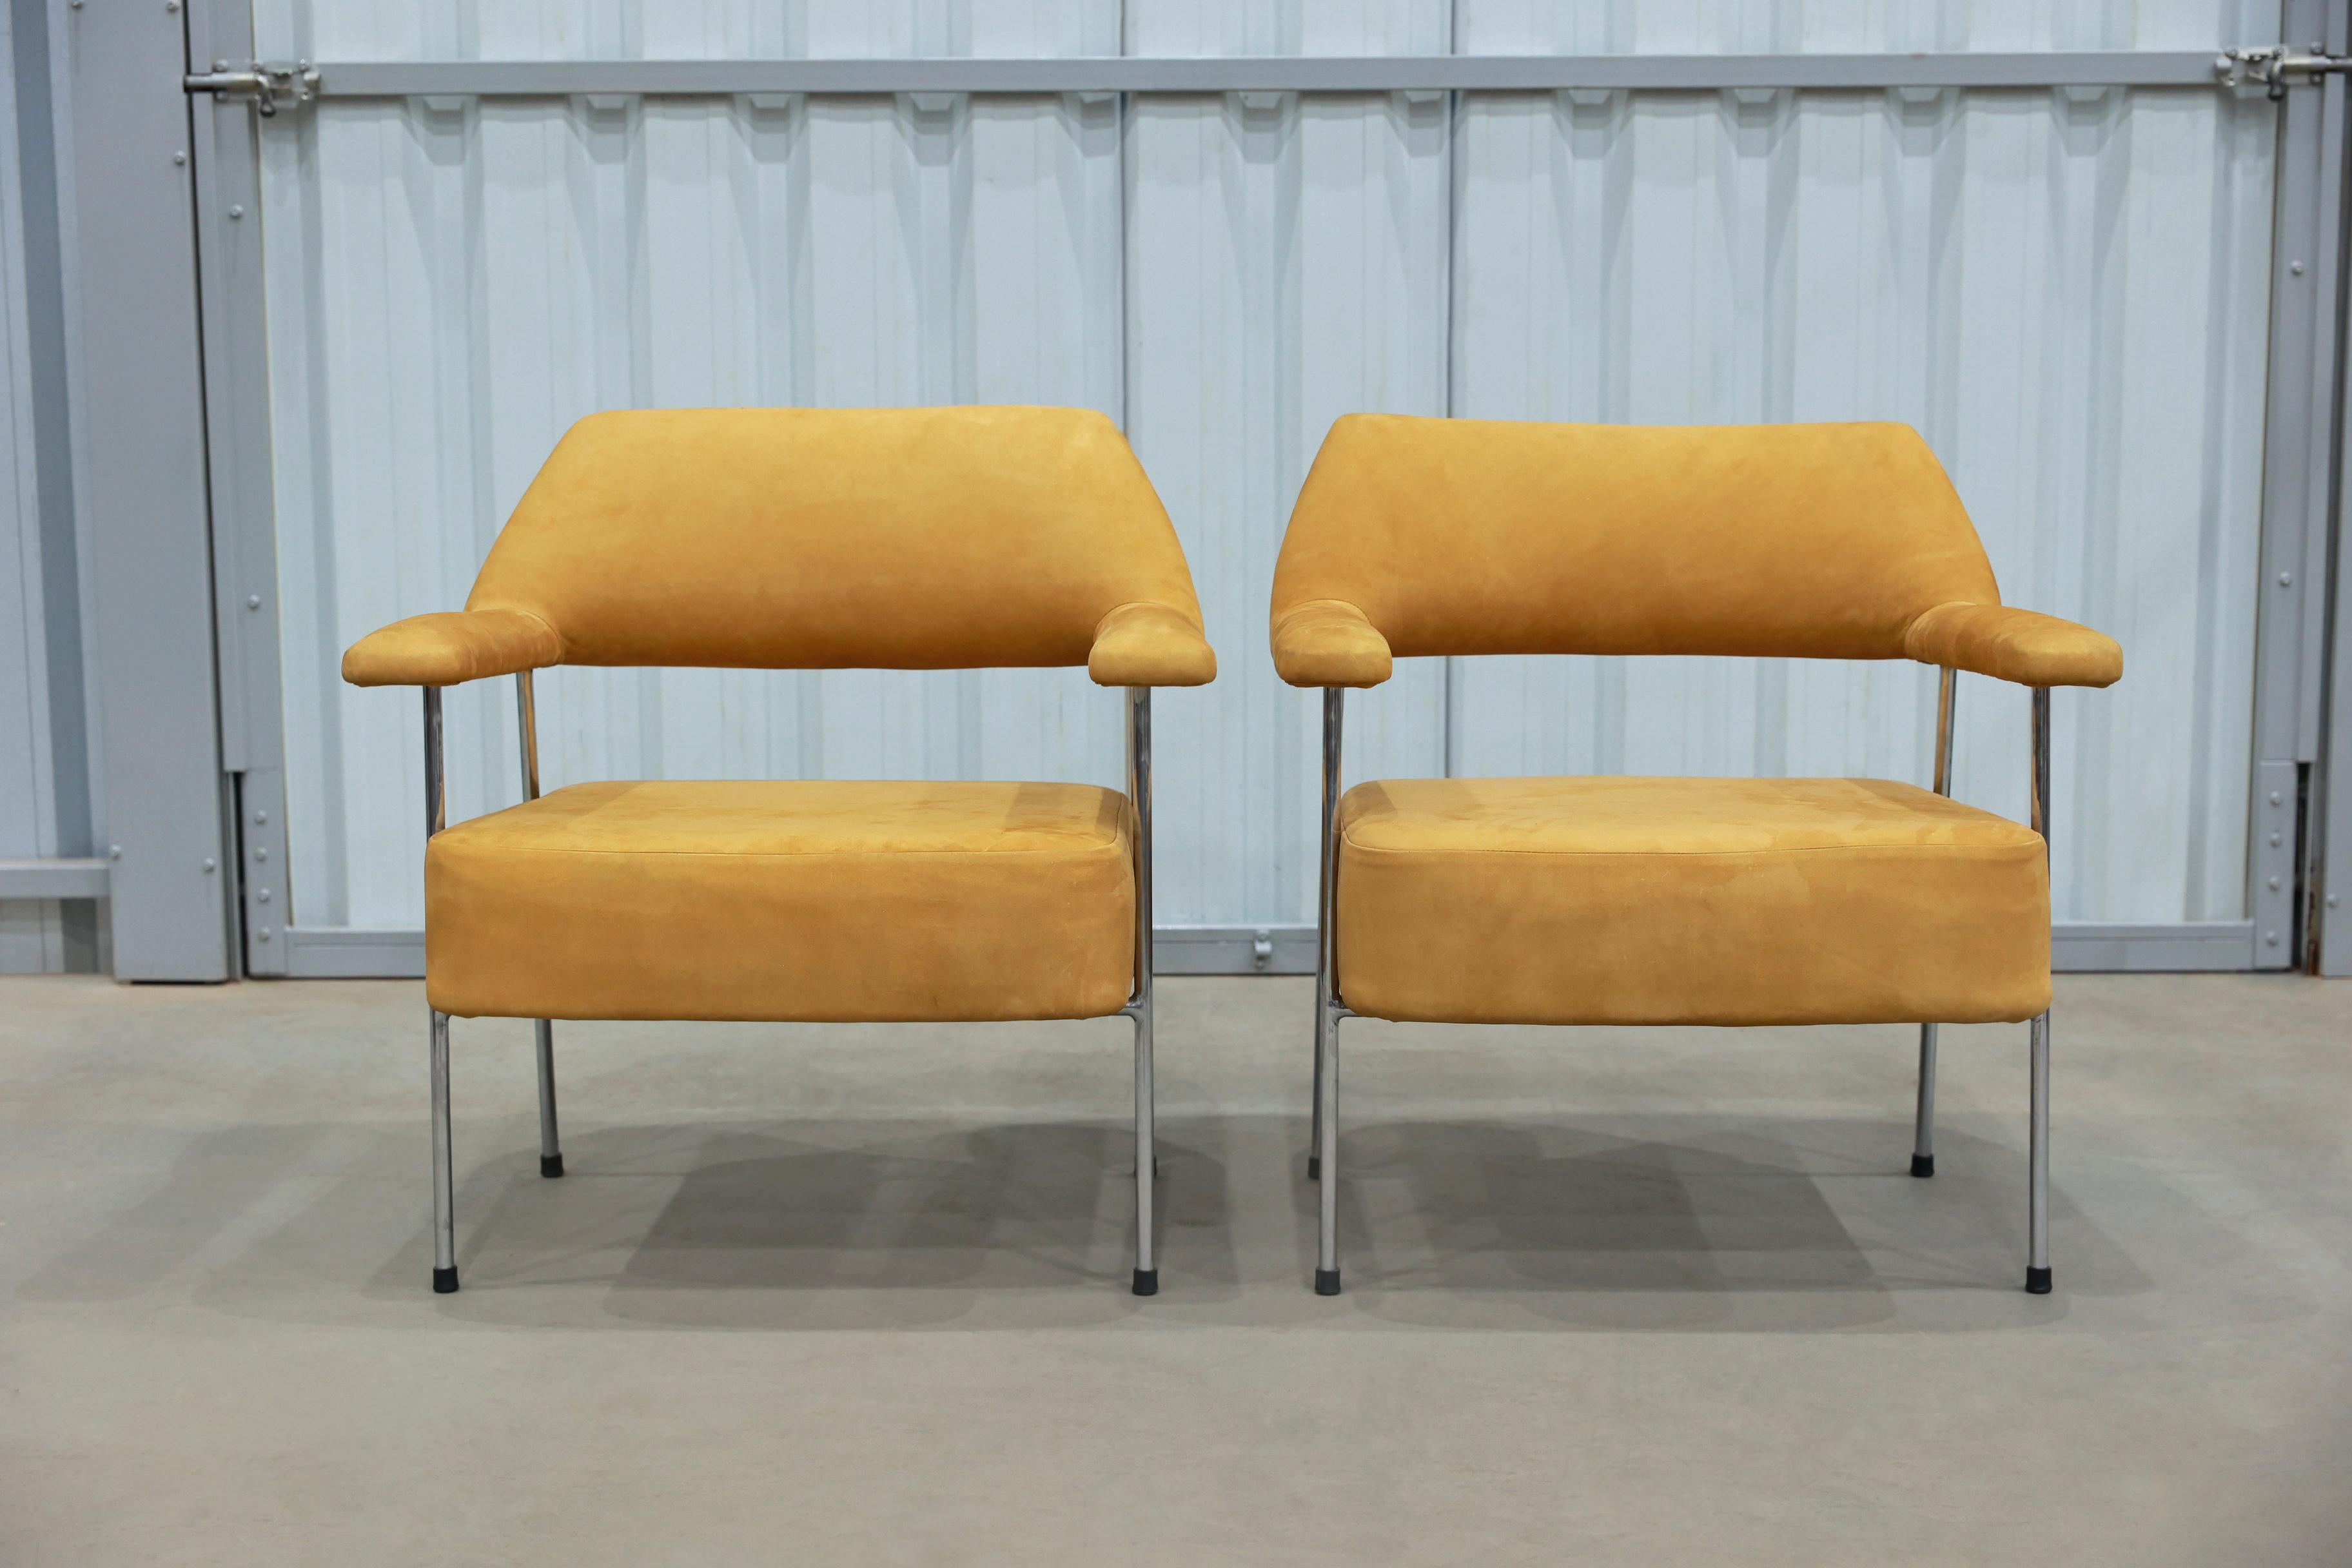 These armchairs by Joaquim Tenreiro are nothing less than specatcular.

The structure of these two chairs is made with painted tubular metal. It features a mustard suede upholstery. The iron has been repainted and refinished and the seats have been